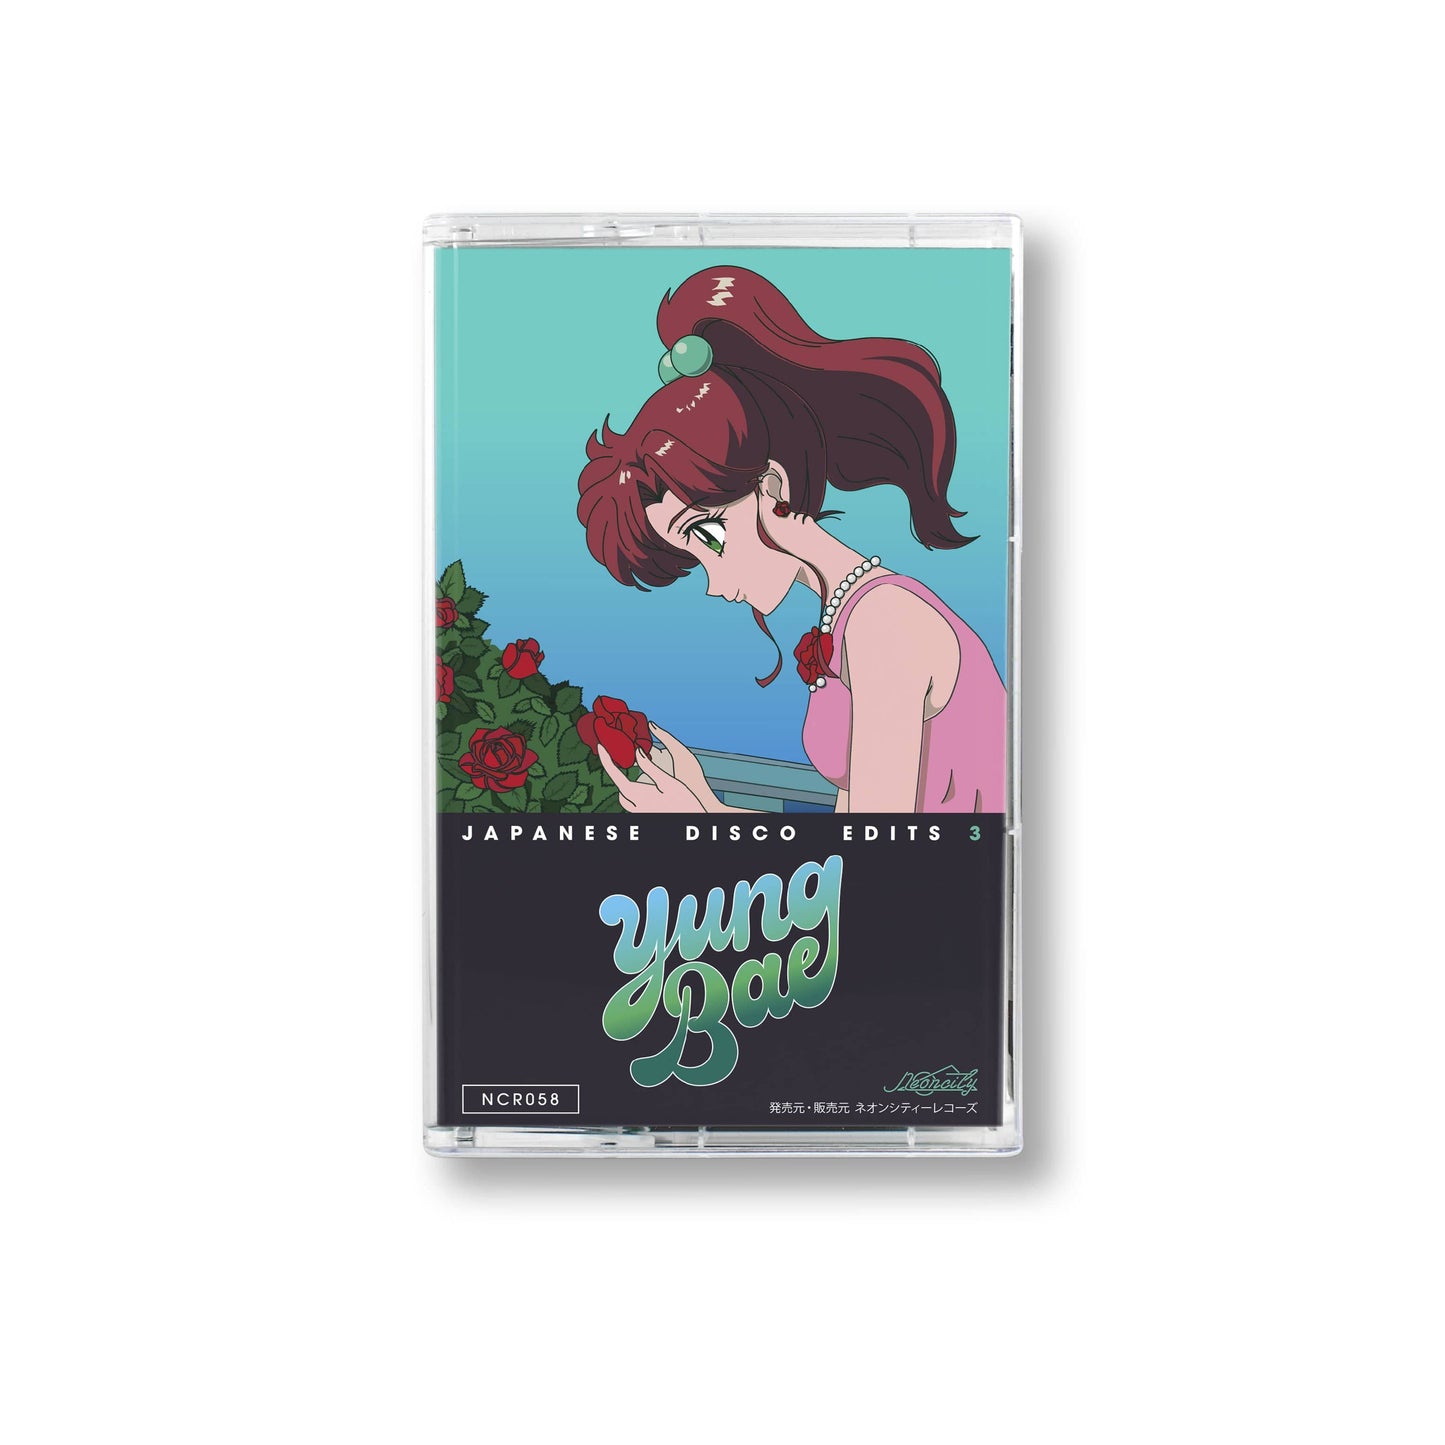 Yung Bae - Japanese Disco Edits 3 Cassette - Neoncity Records